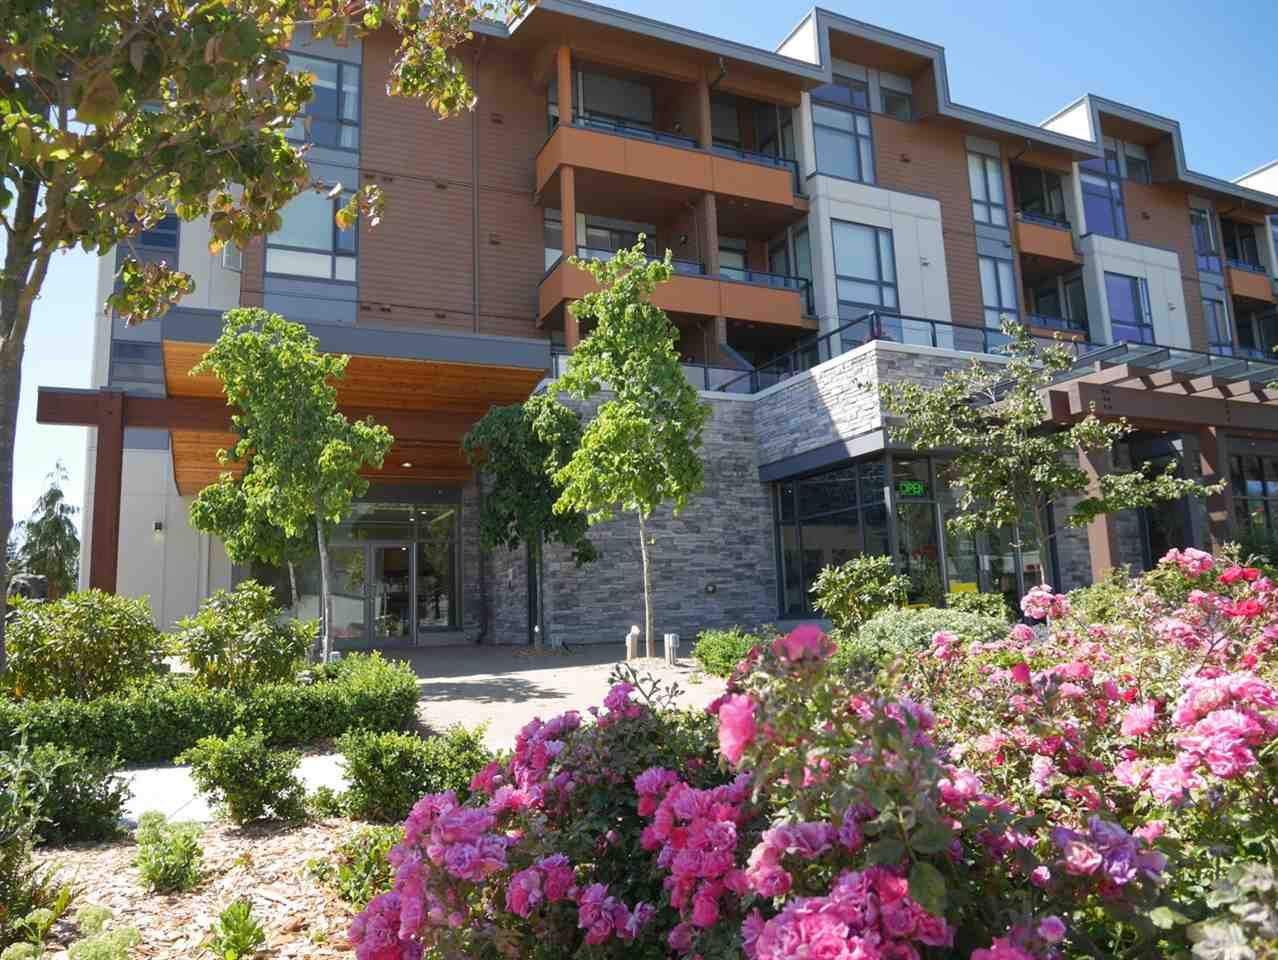 Main Photo: 401 875 GIBSONS Way in Gibsons: Gibsons & Area Condo for sale (Sunshine Coast)  : MLS®# R2292033